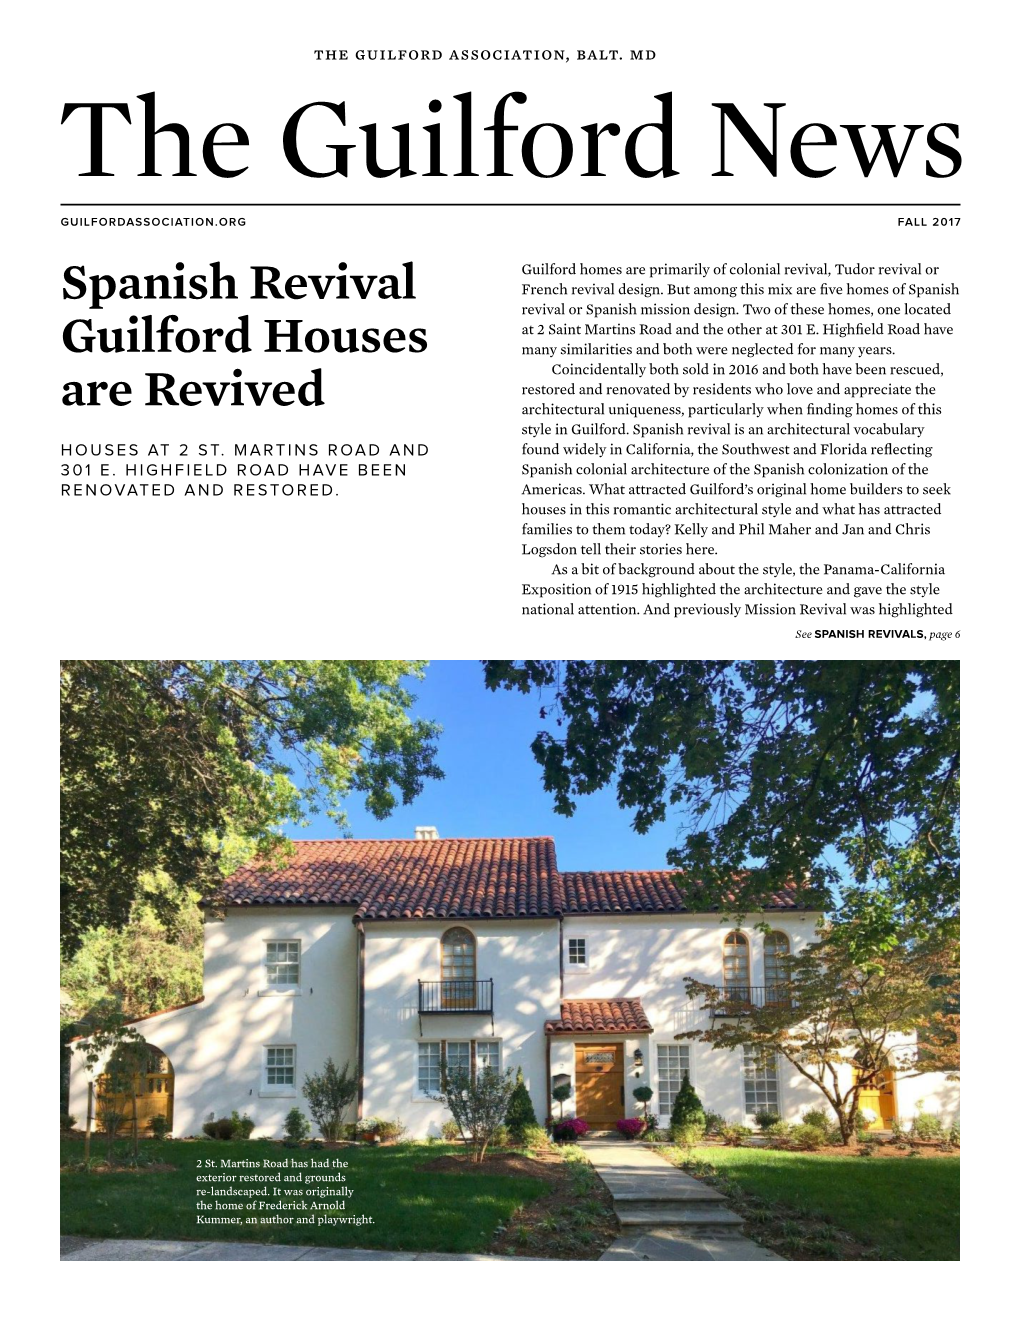 Spanish Revival Guilford Houses Are Revived